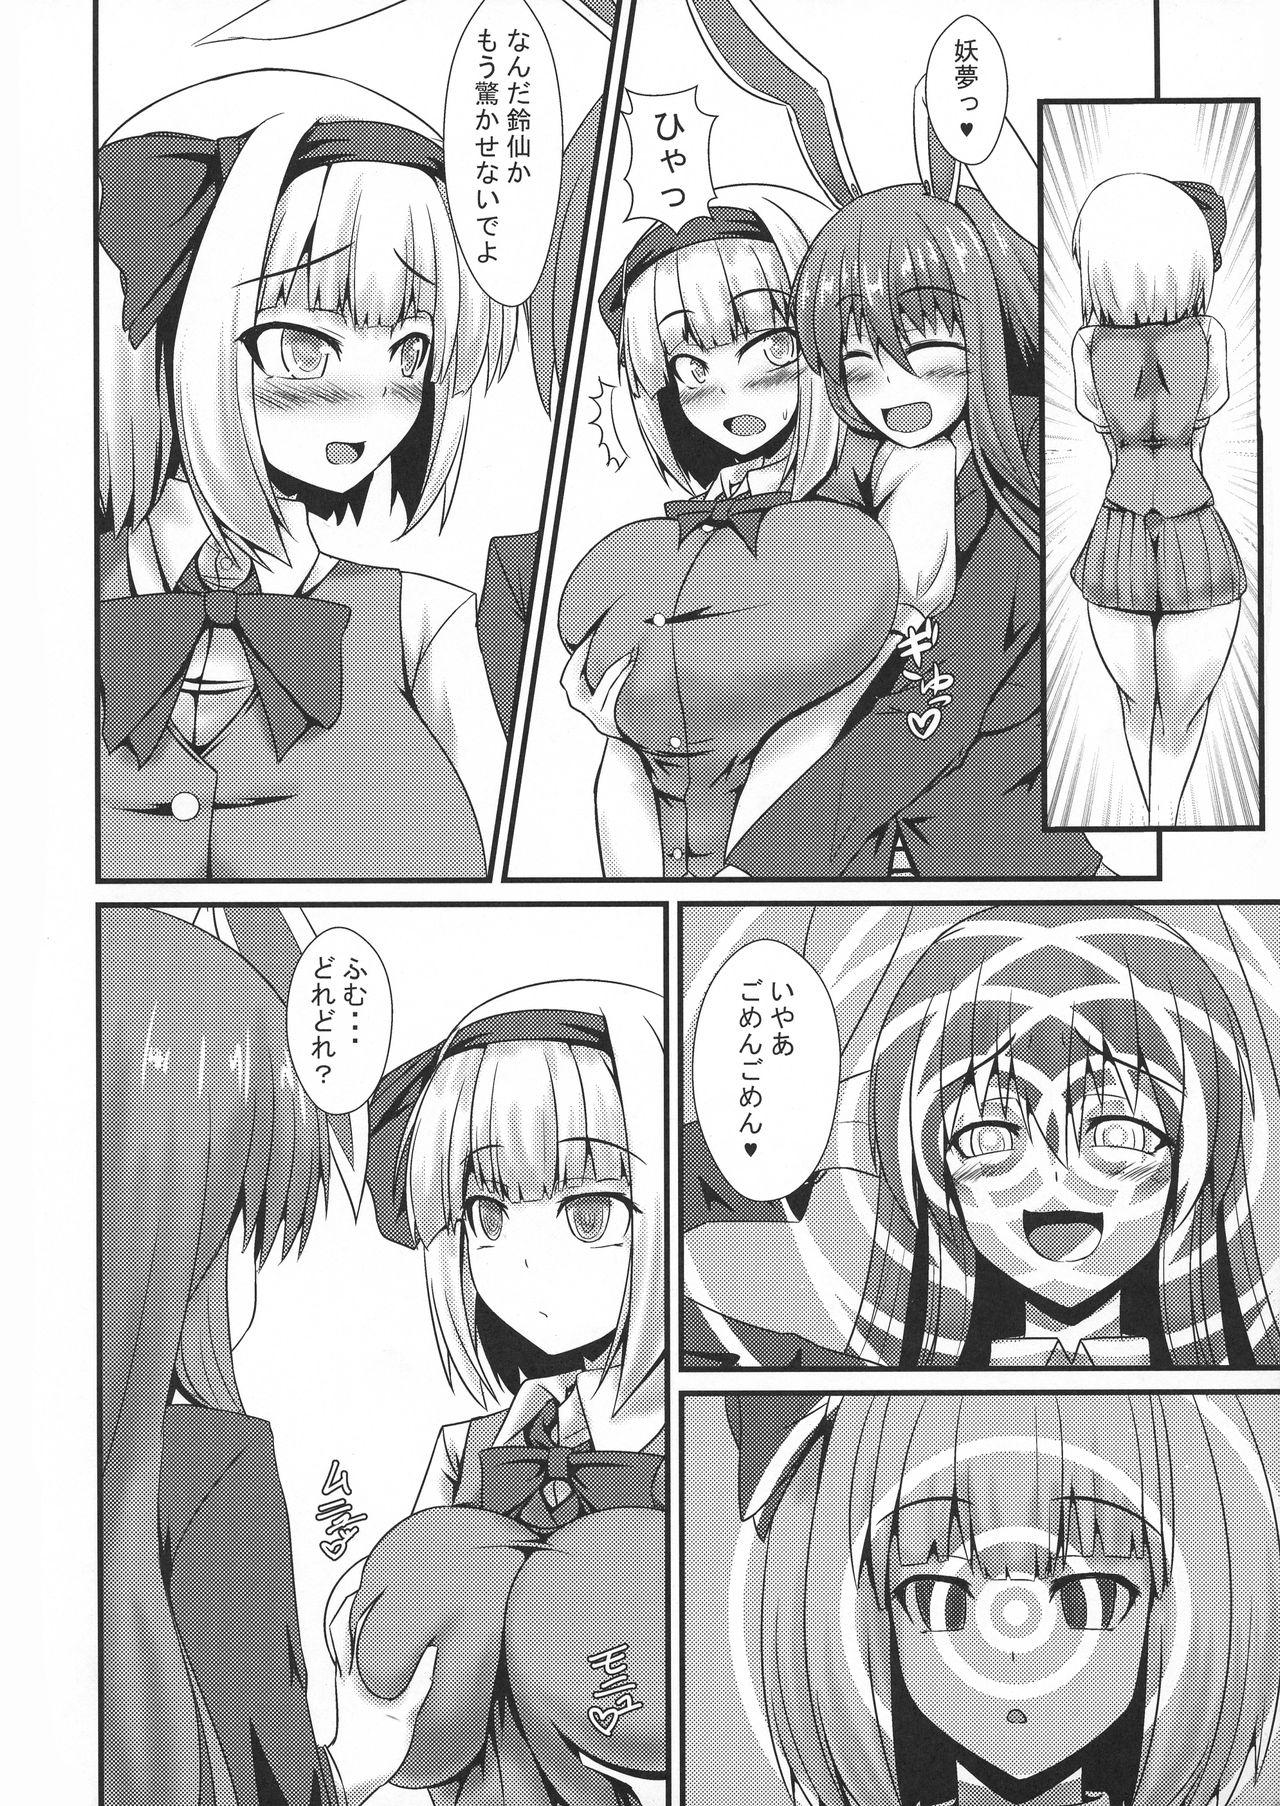 Speculum Futanari Udon no Tabehoudai - Touhou project Picked Up - Page 6